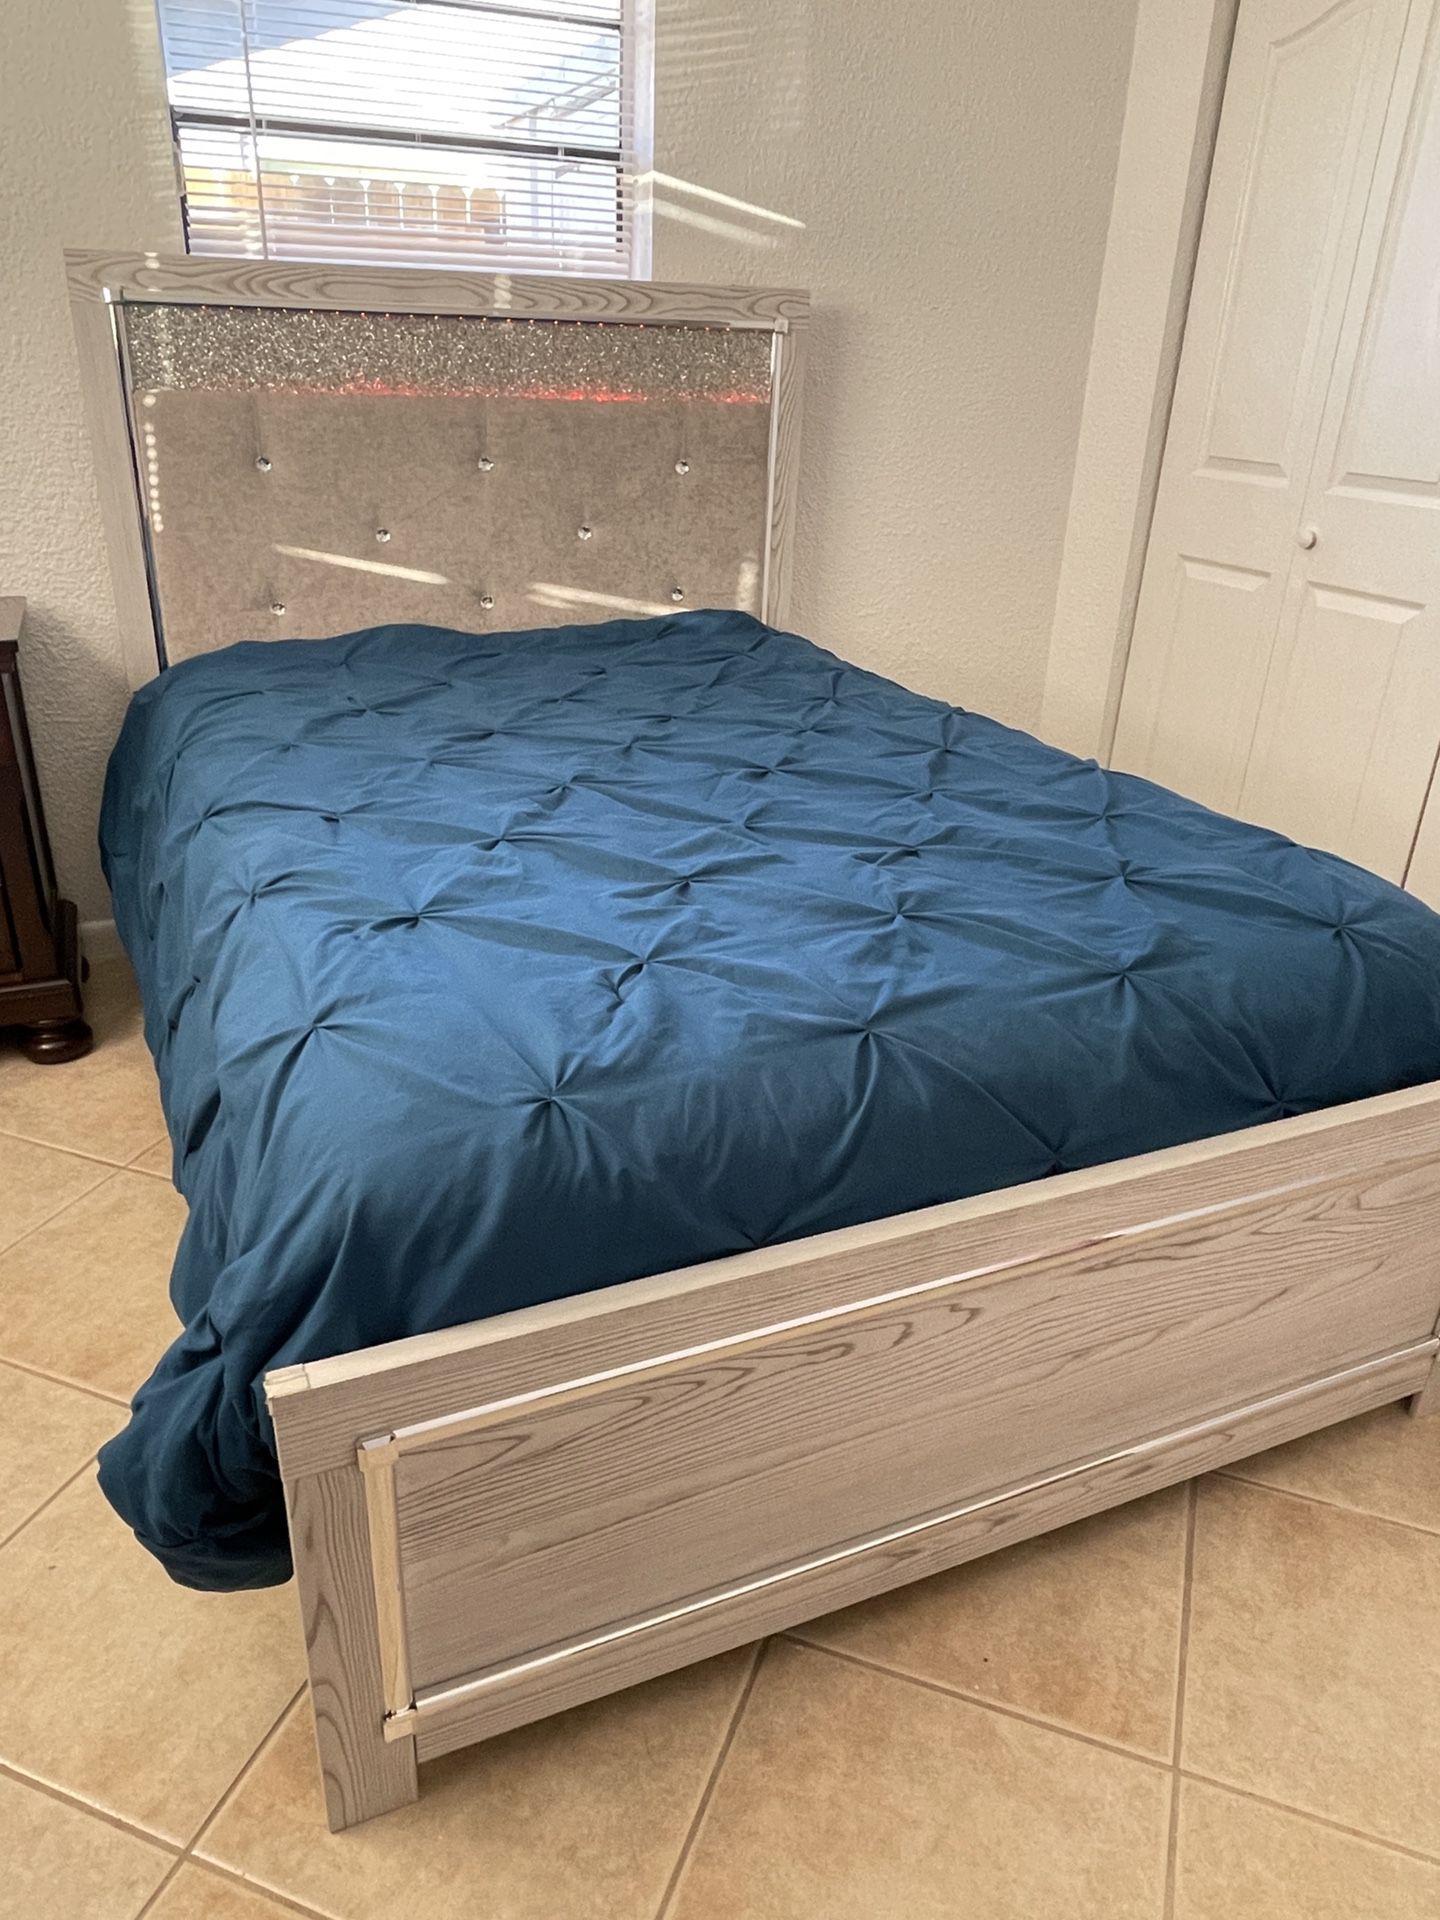 Full Bed With Faux Crystals, Led Lightings, Remote, Mattress And Full Coverage Sleepys Mattress Protector- Less Than a Year Old